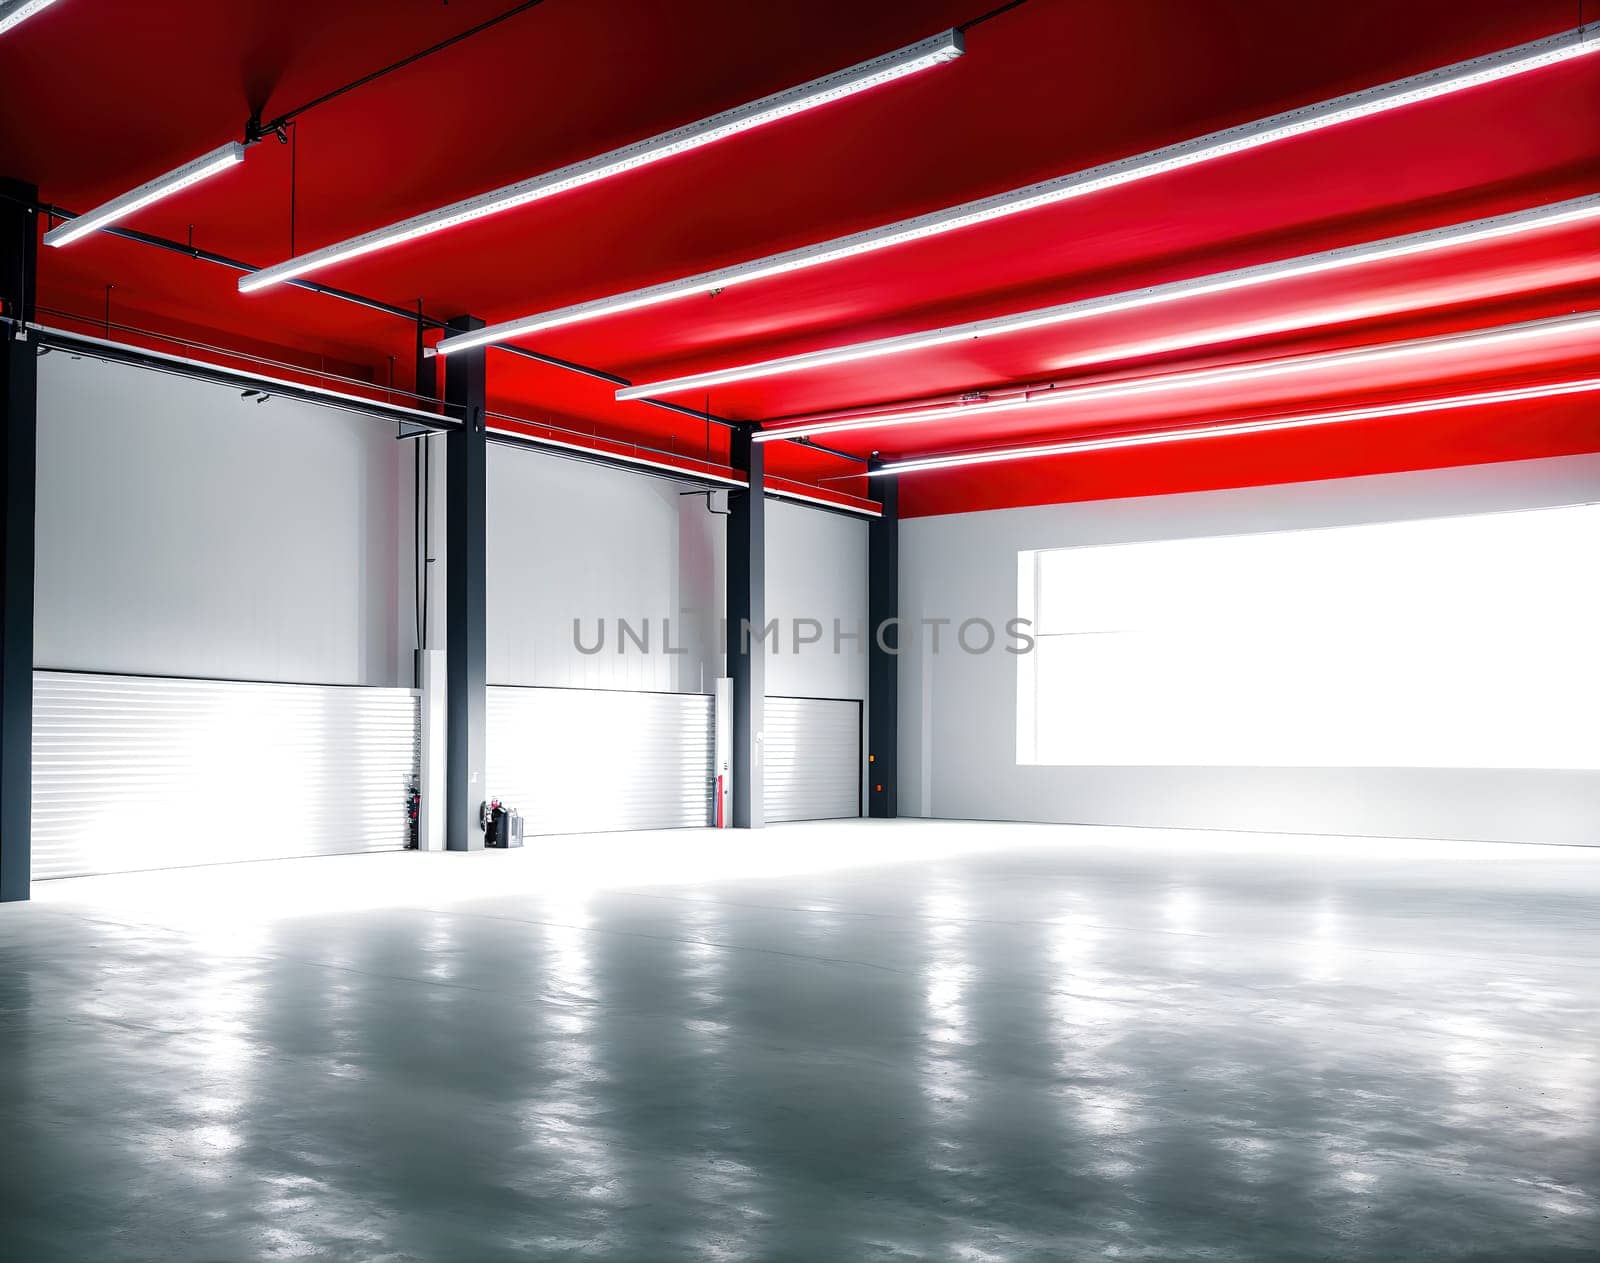 The image shows a large, empty warehouse with red ceiling beams and white walls.